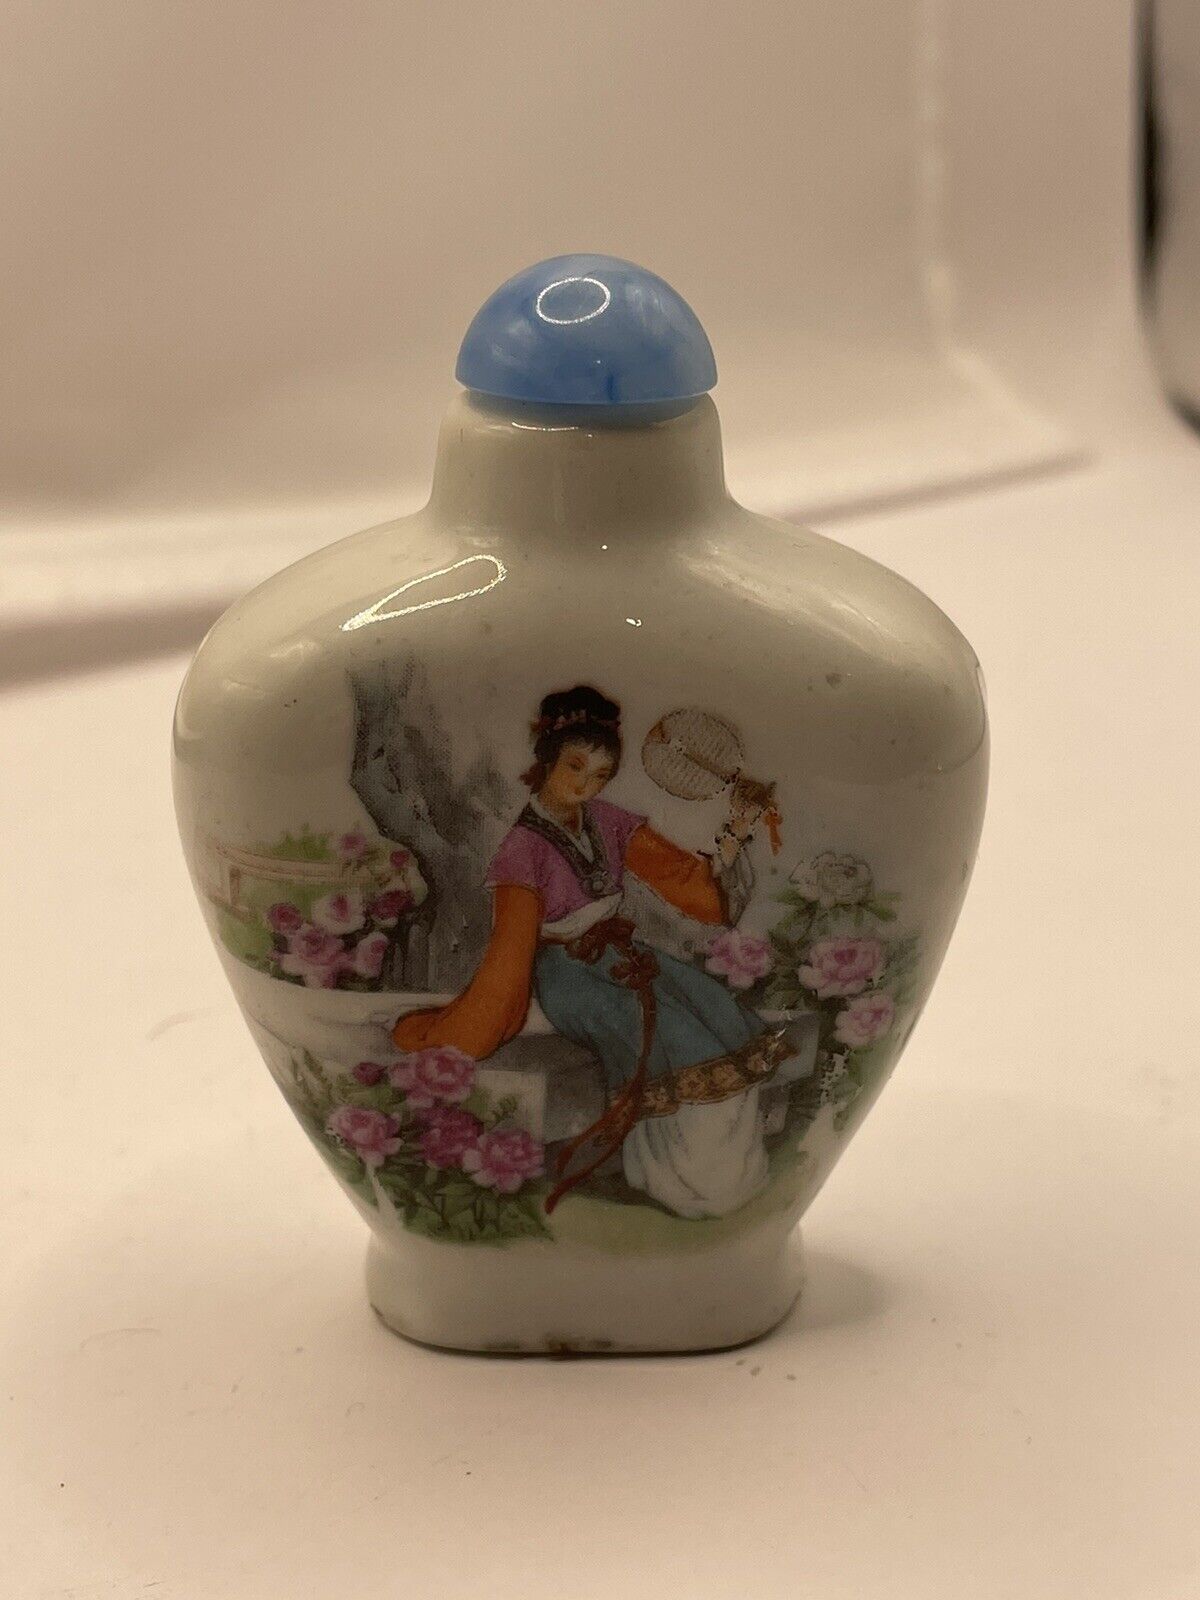 Antique Valuations: Chinese Porcelain Snuff Bottle